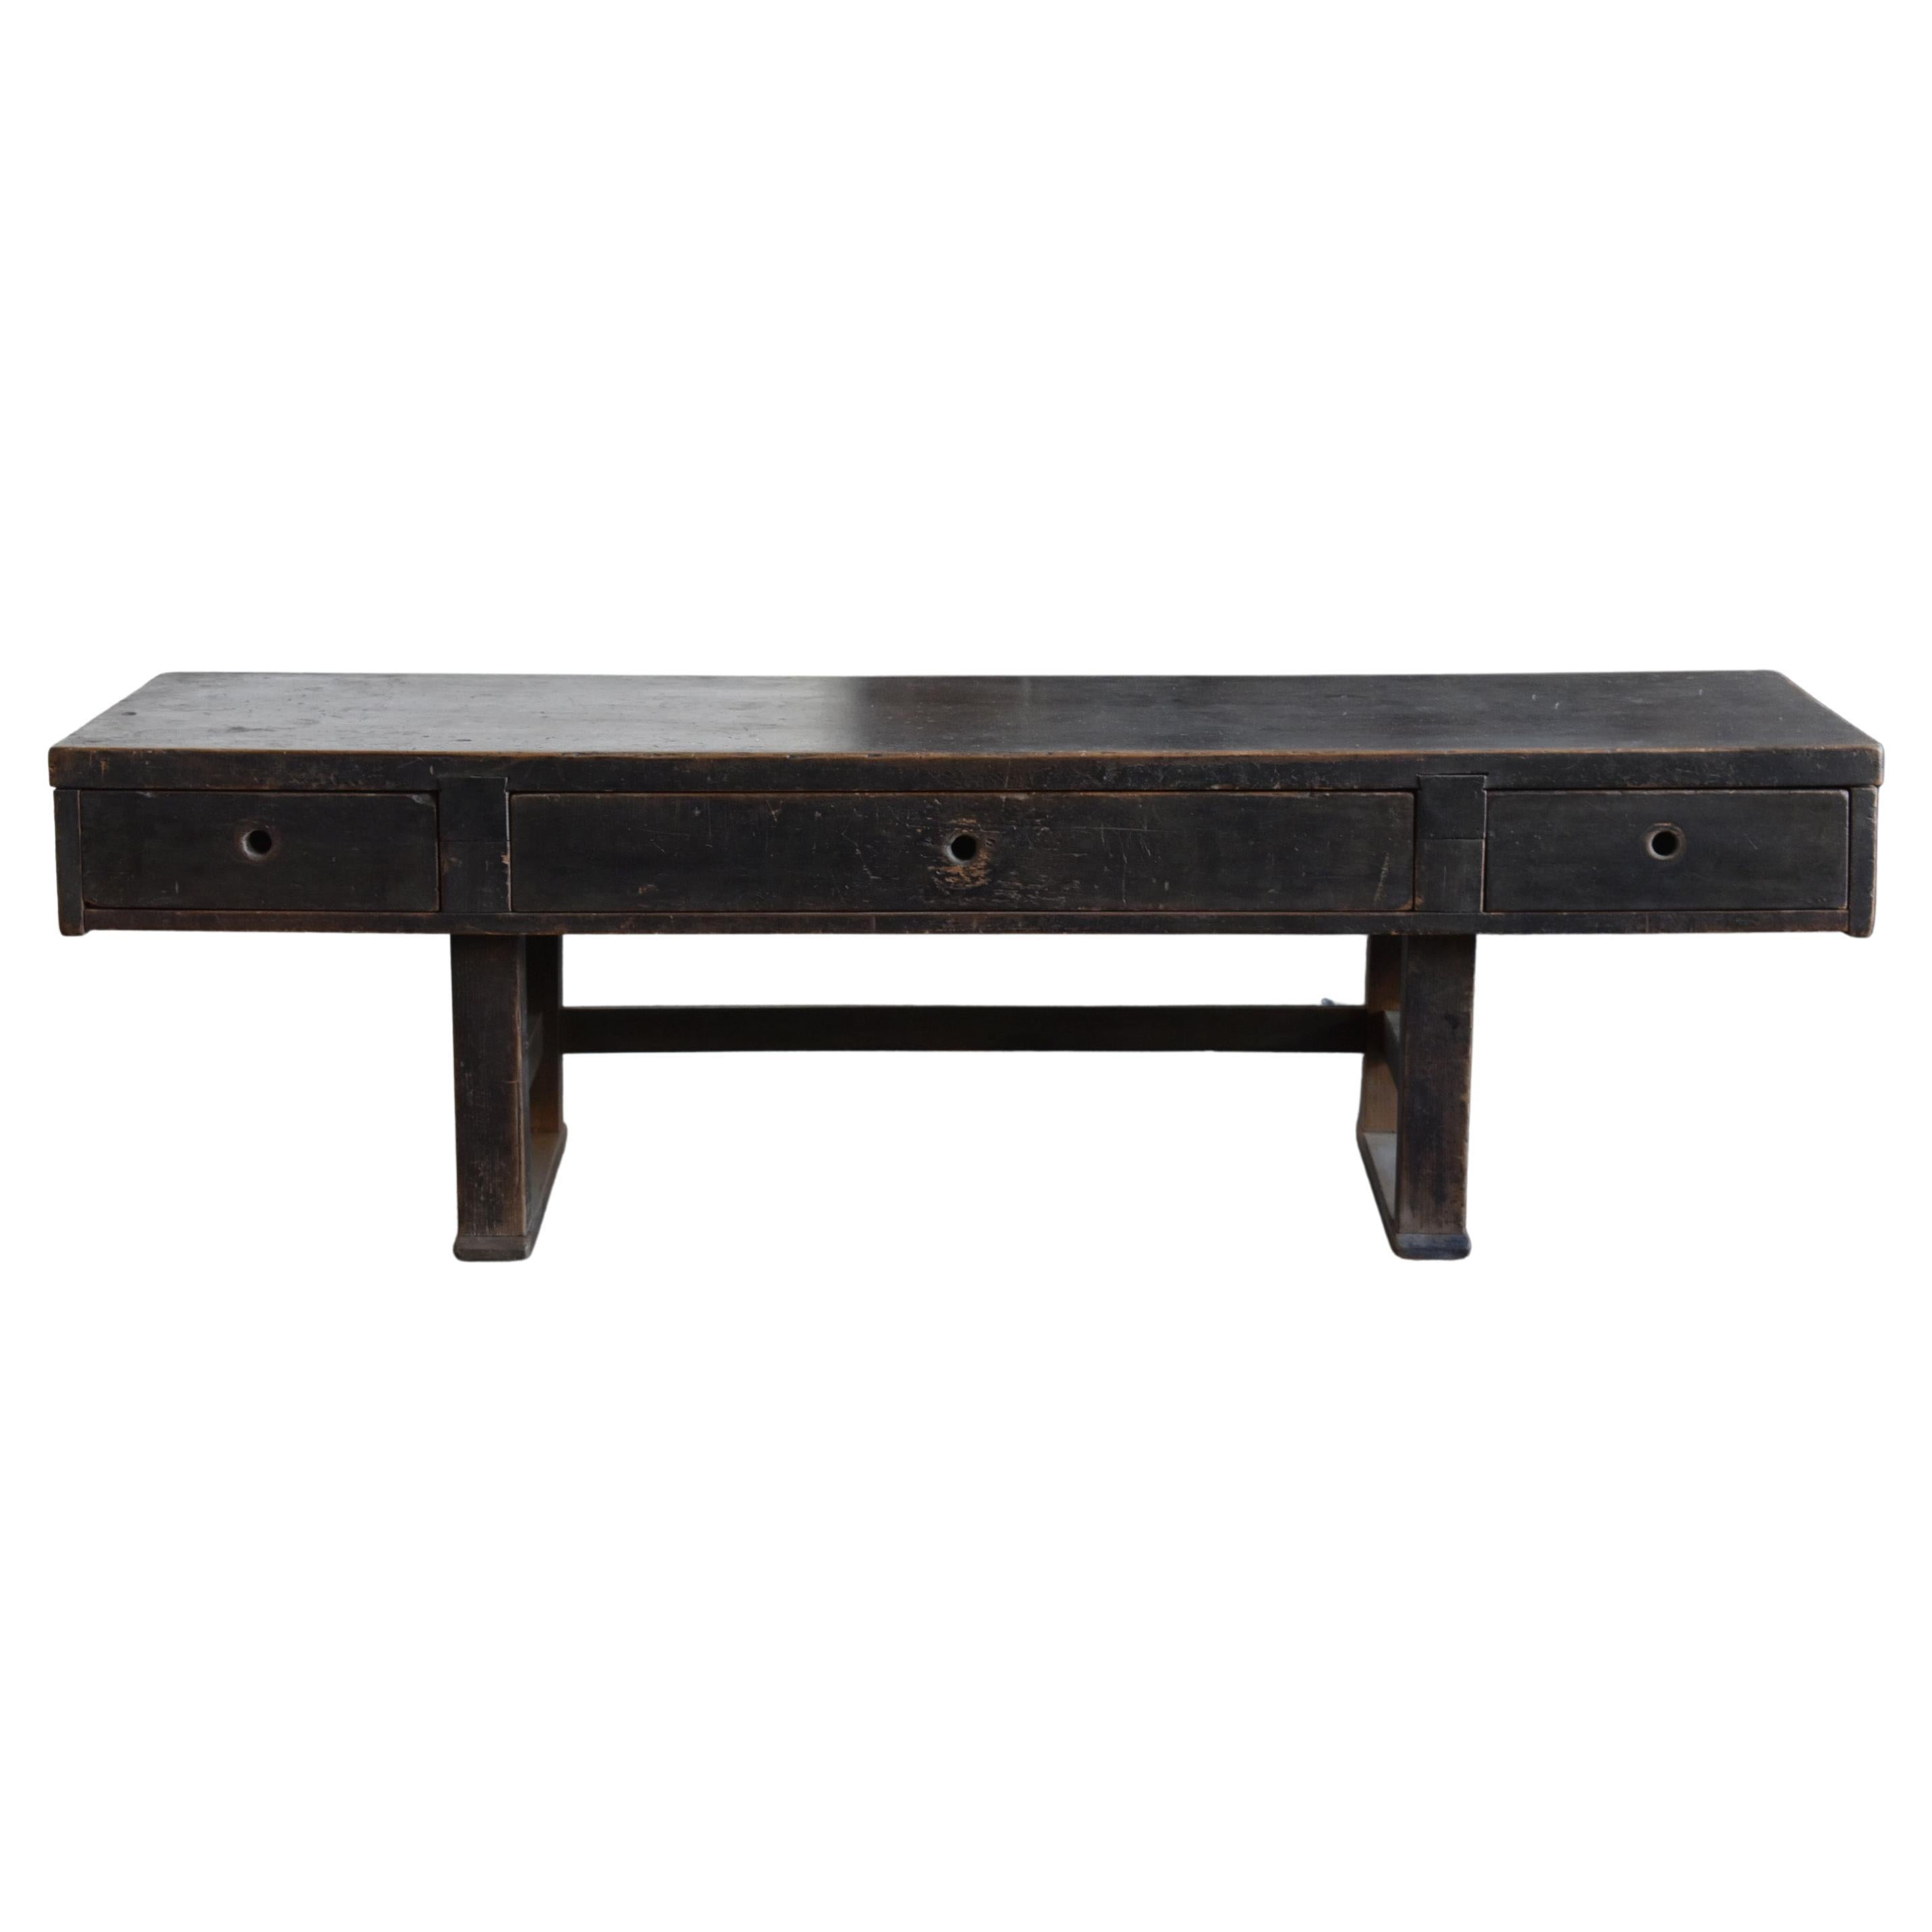 Japanese Antique Wooden Low Table / 1890-1940 / Sofa Table